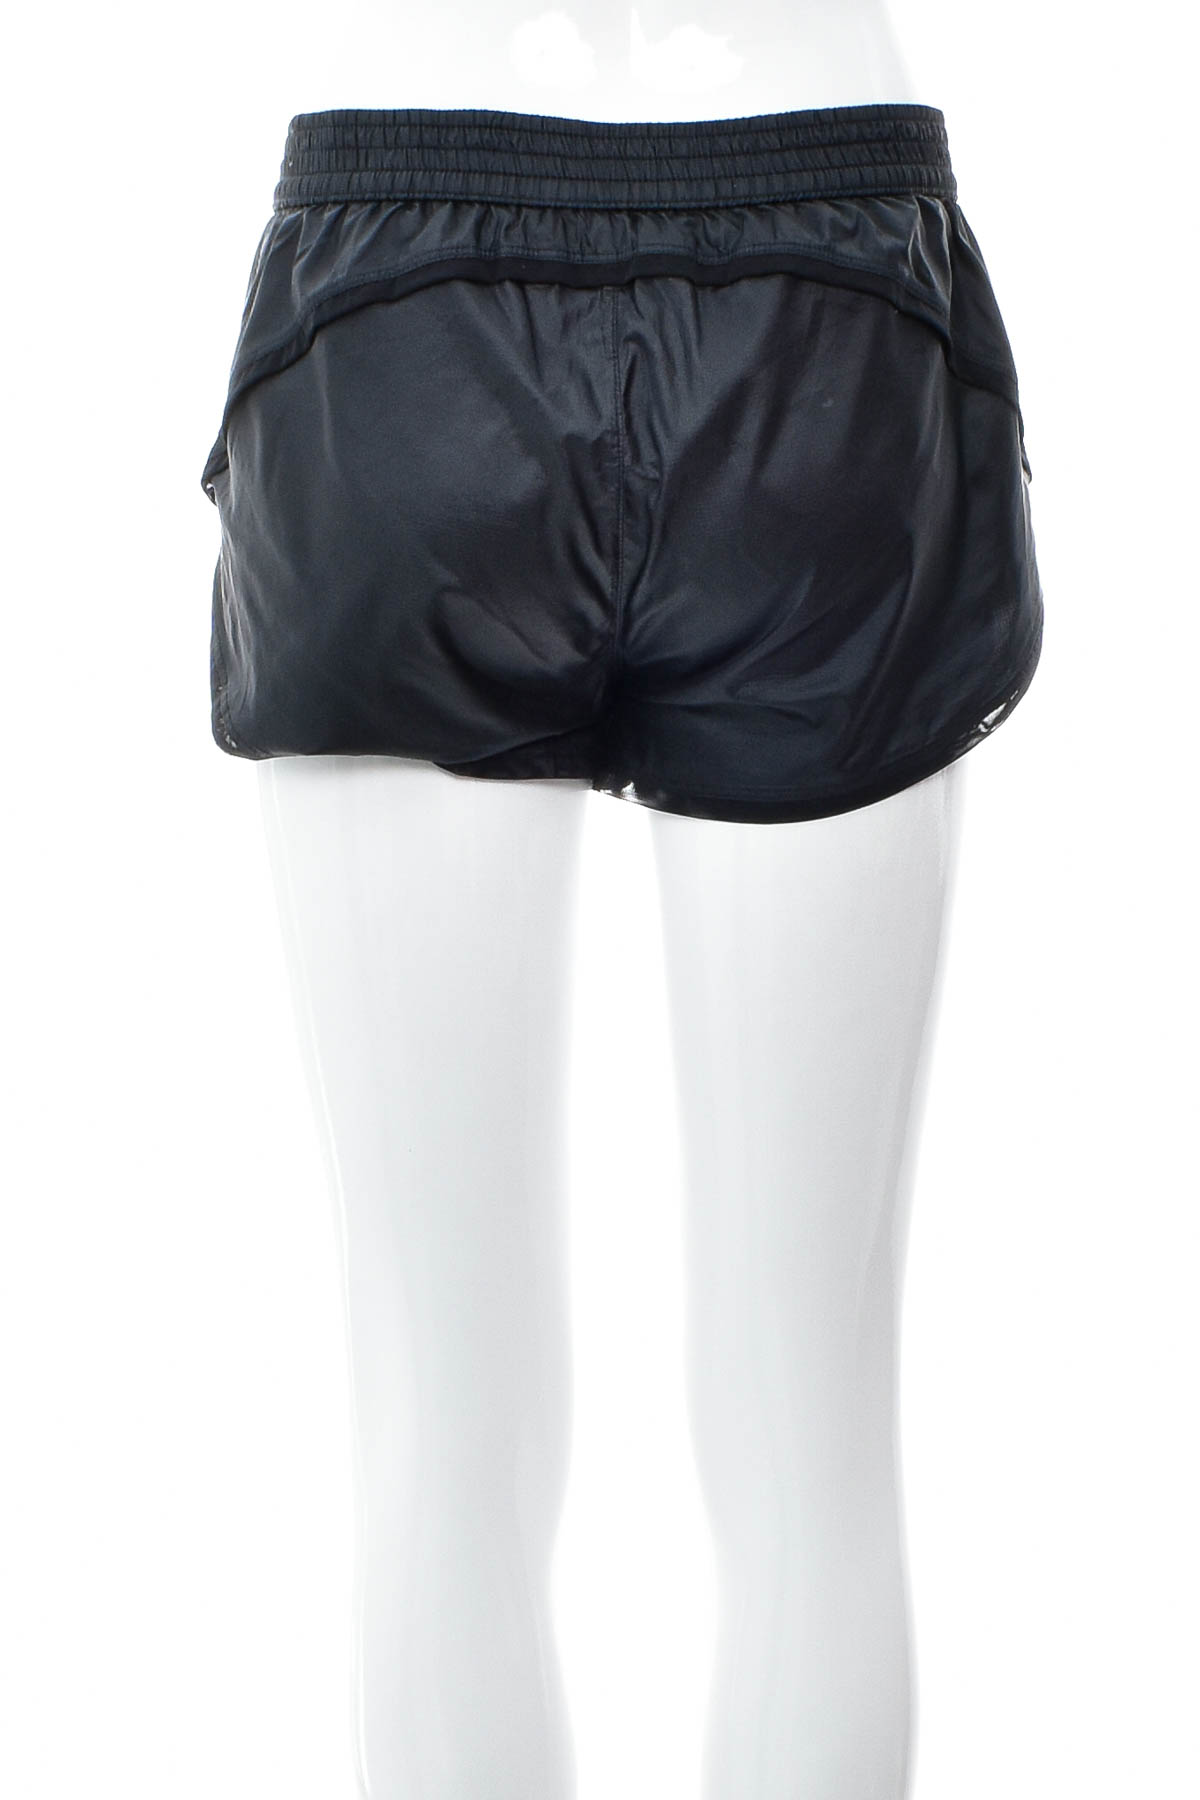 Women's shorts - Abercrombie & Fitch - 1